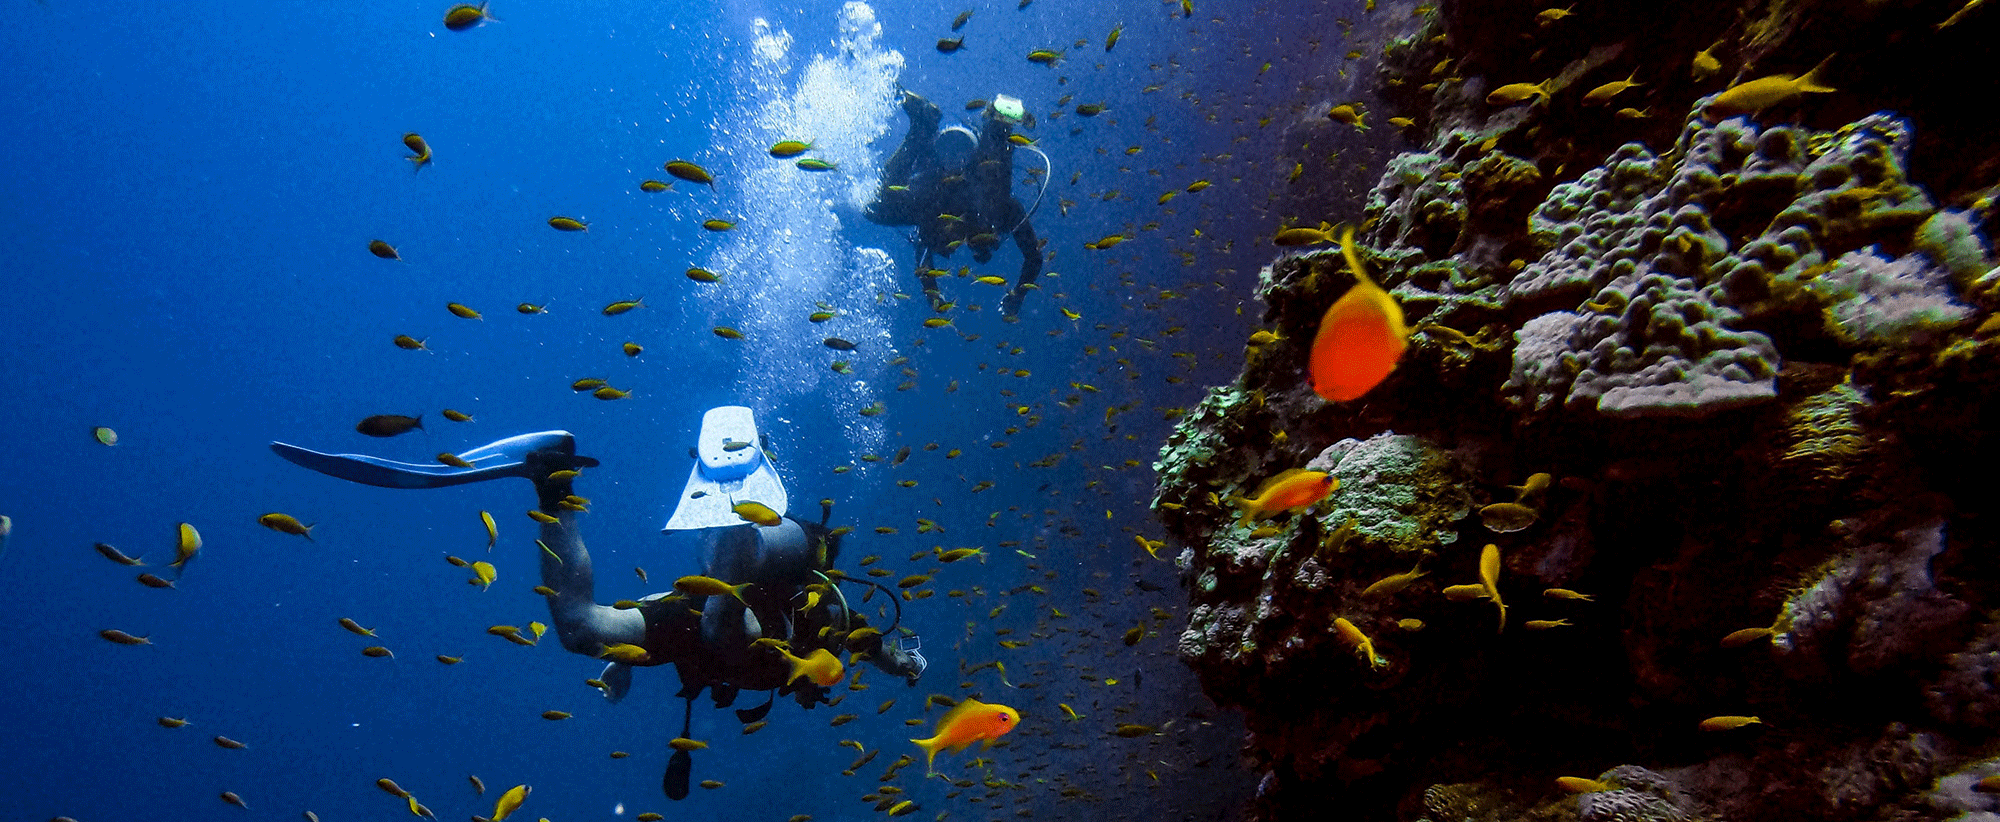 Divers in the reef